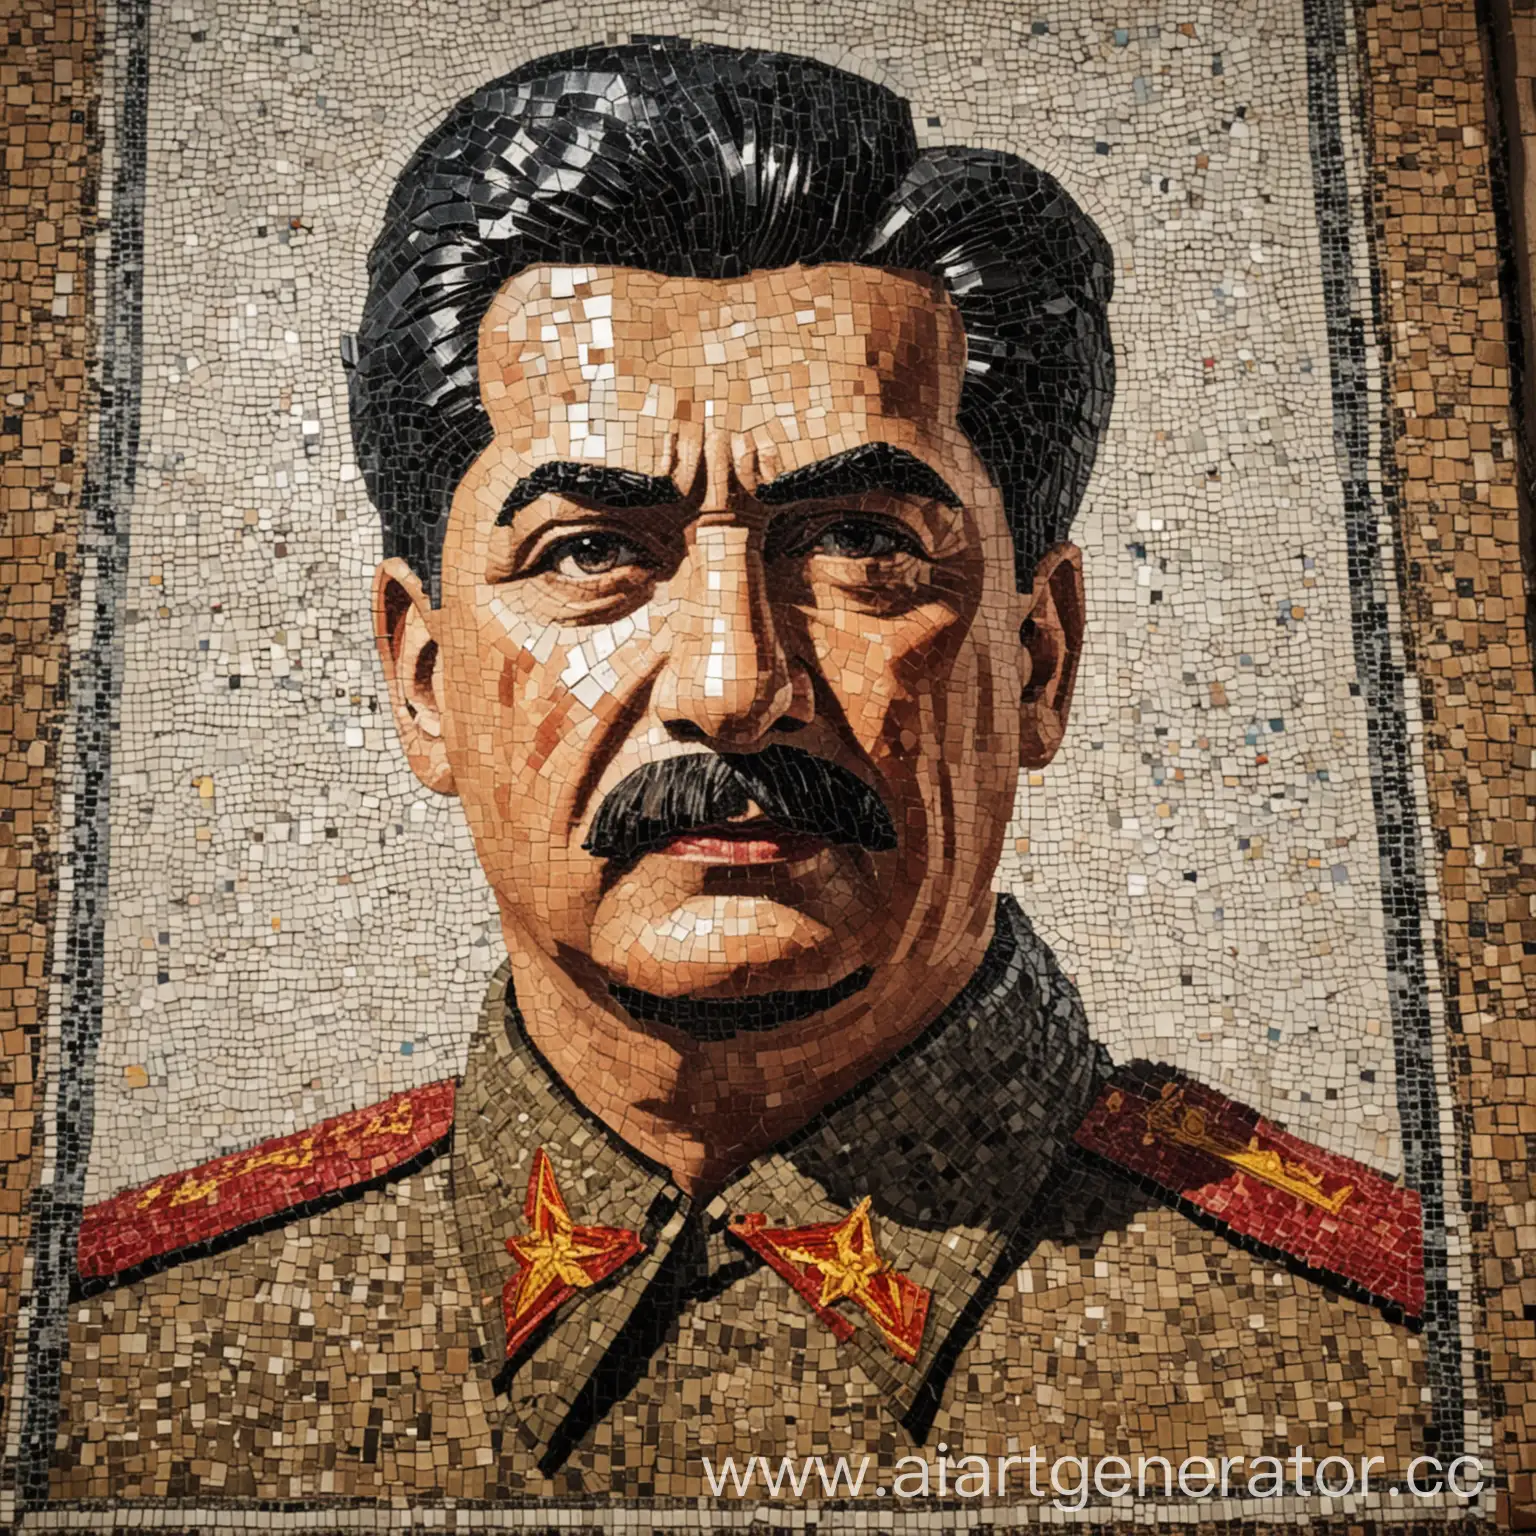 Mosaic-Art-Depicting-the-Iconic-Image-of-Stalin